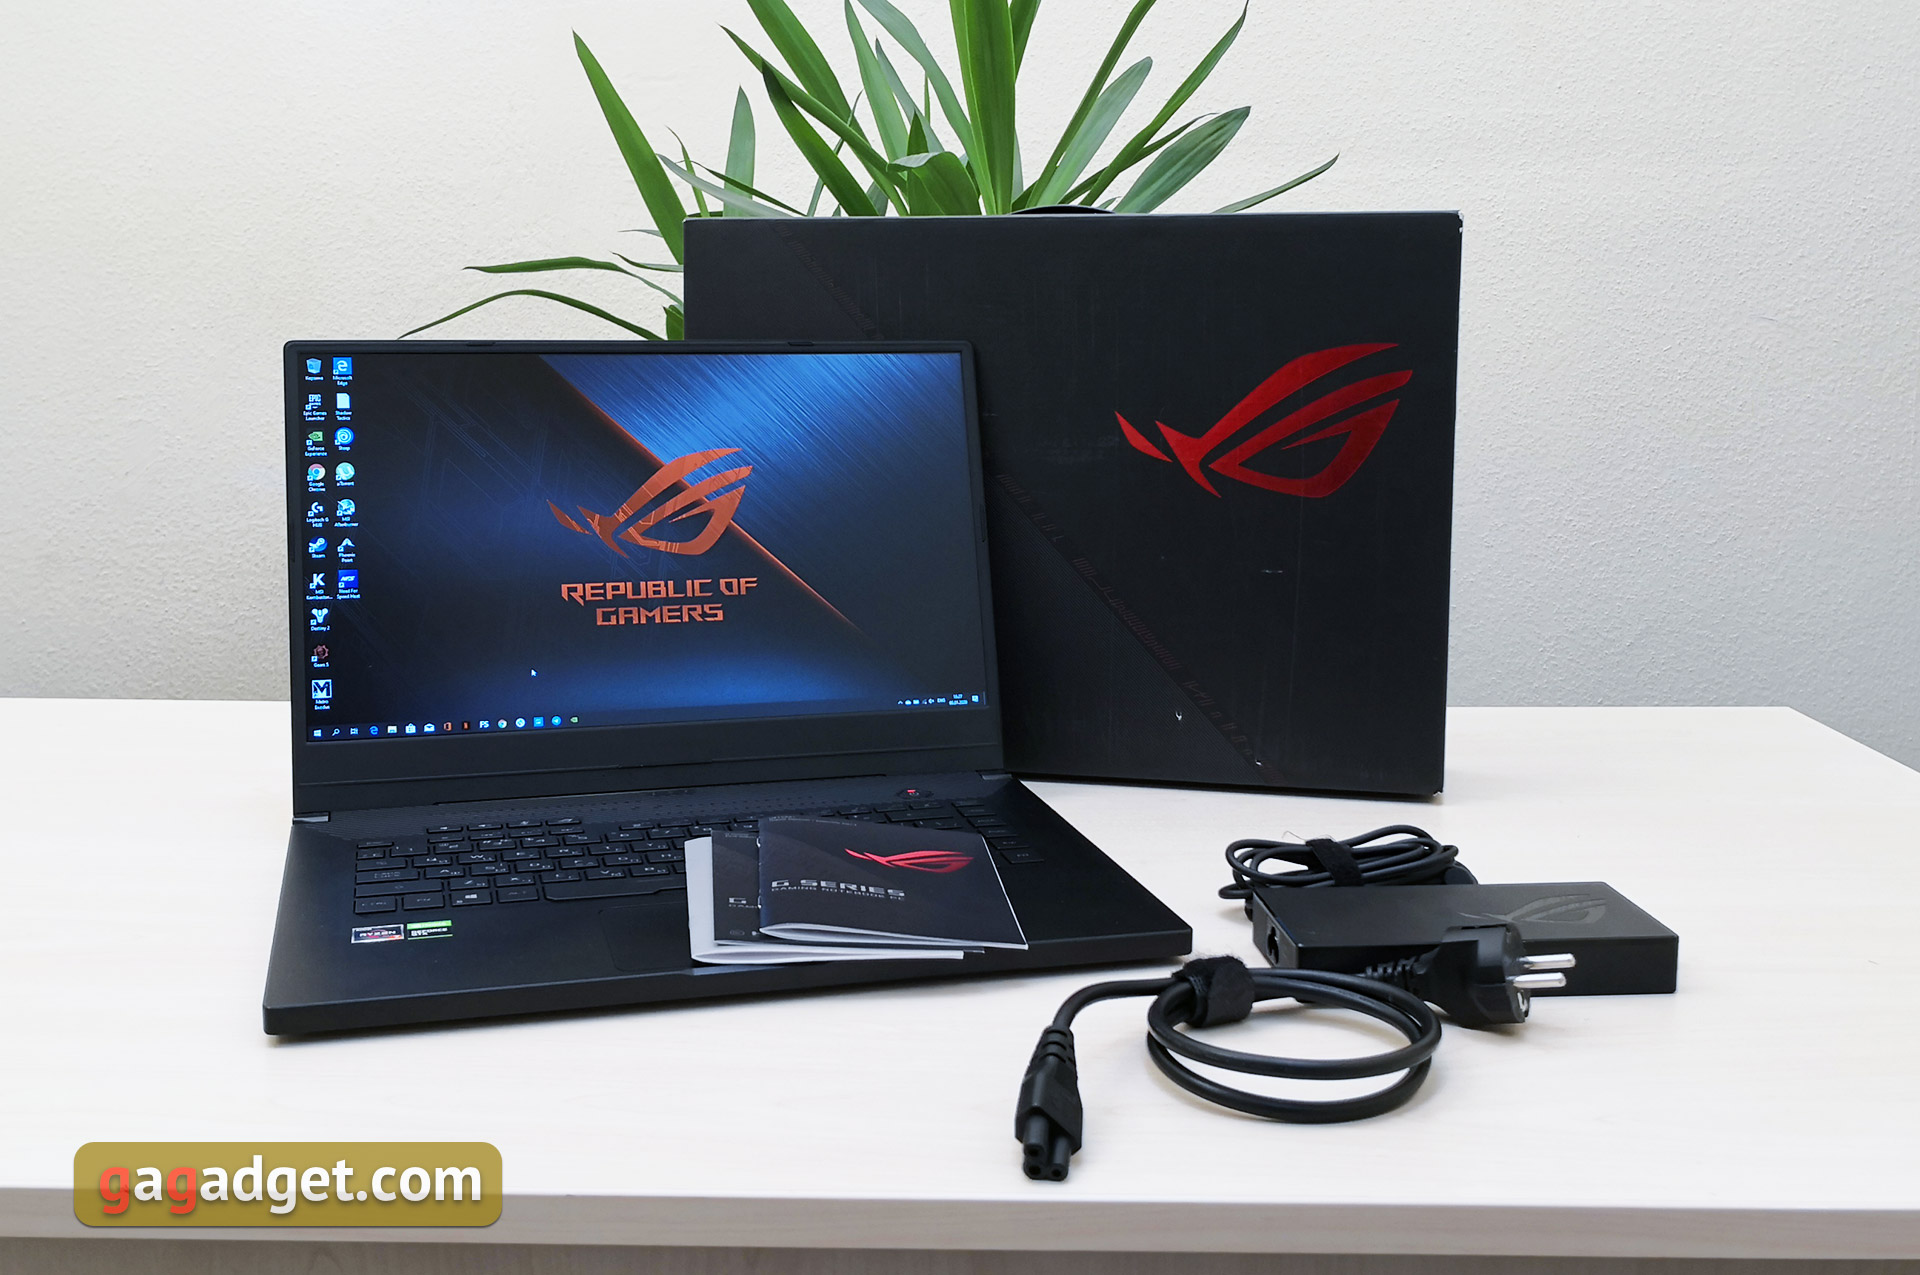 ASUS ROG Zephyrus G Looks Back: Compact Gaming Laptop with AMD and GeForce -3